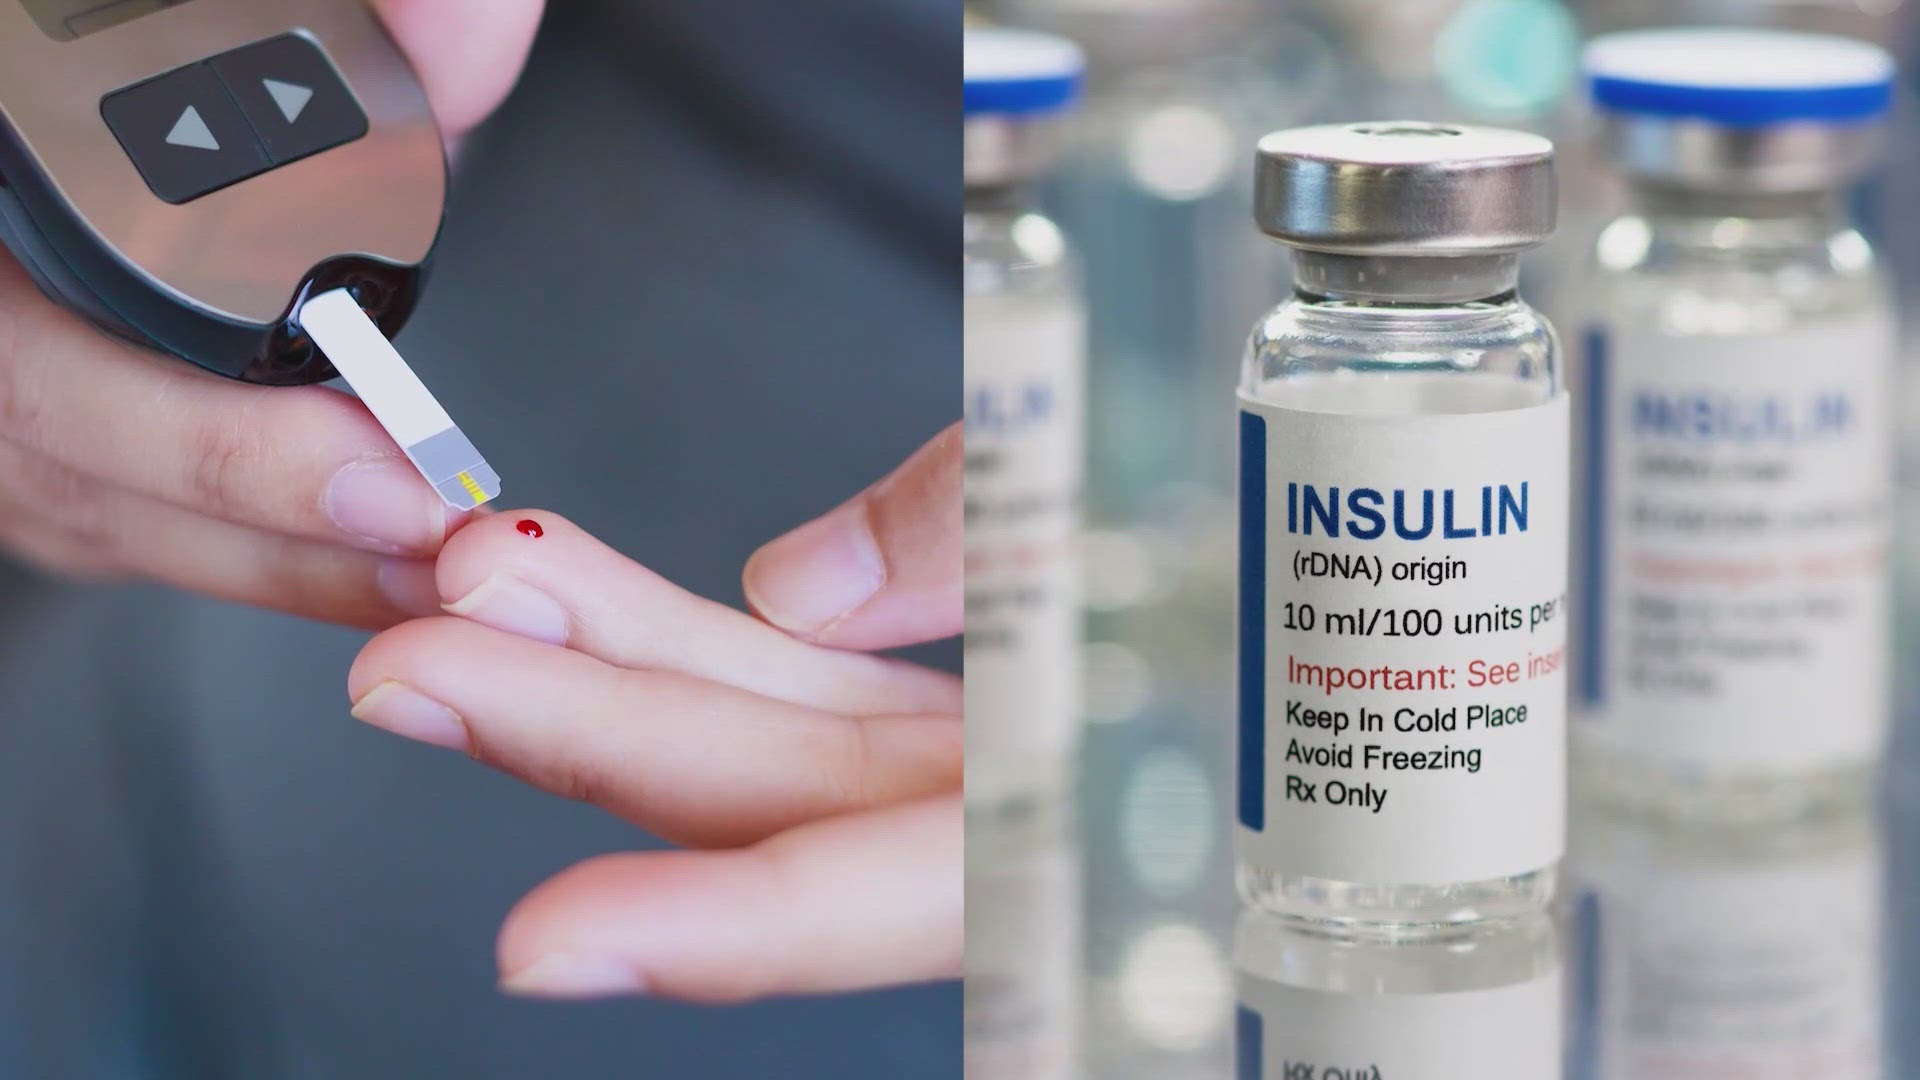 This life-saving drug is commonly used by people living with diabetes.